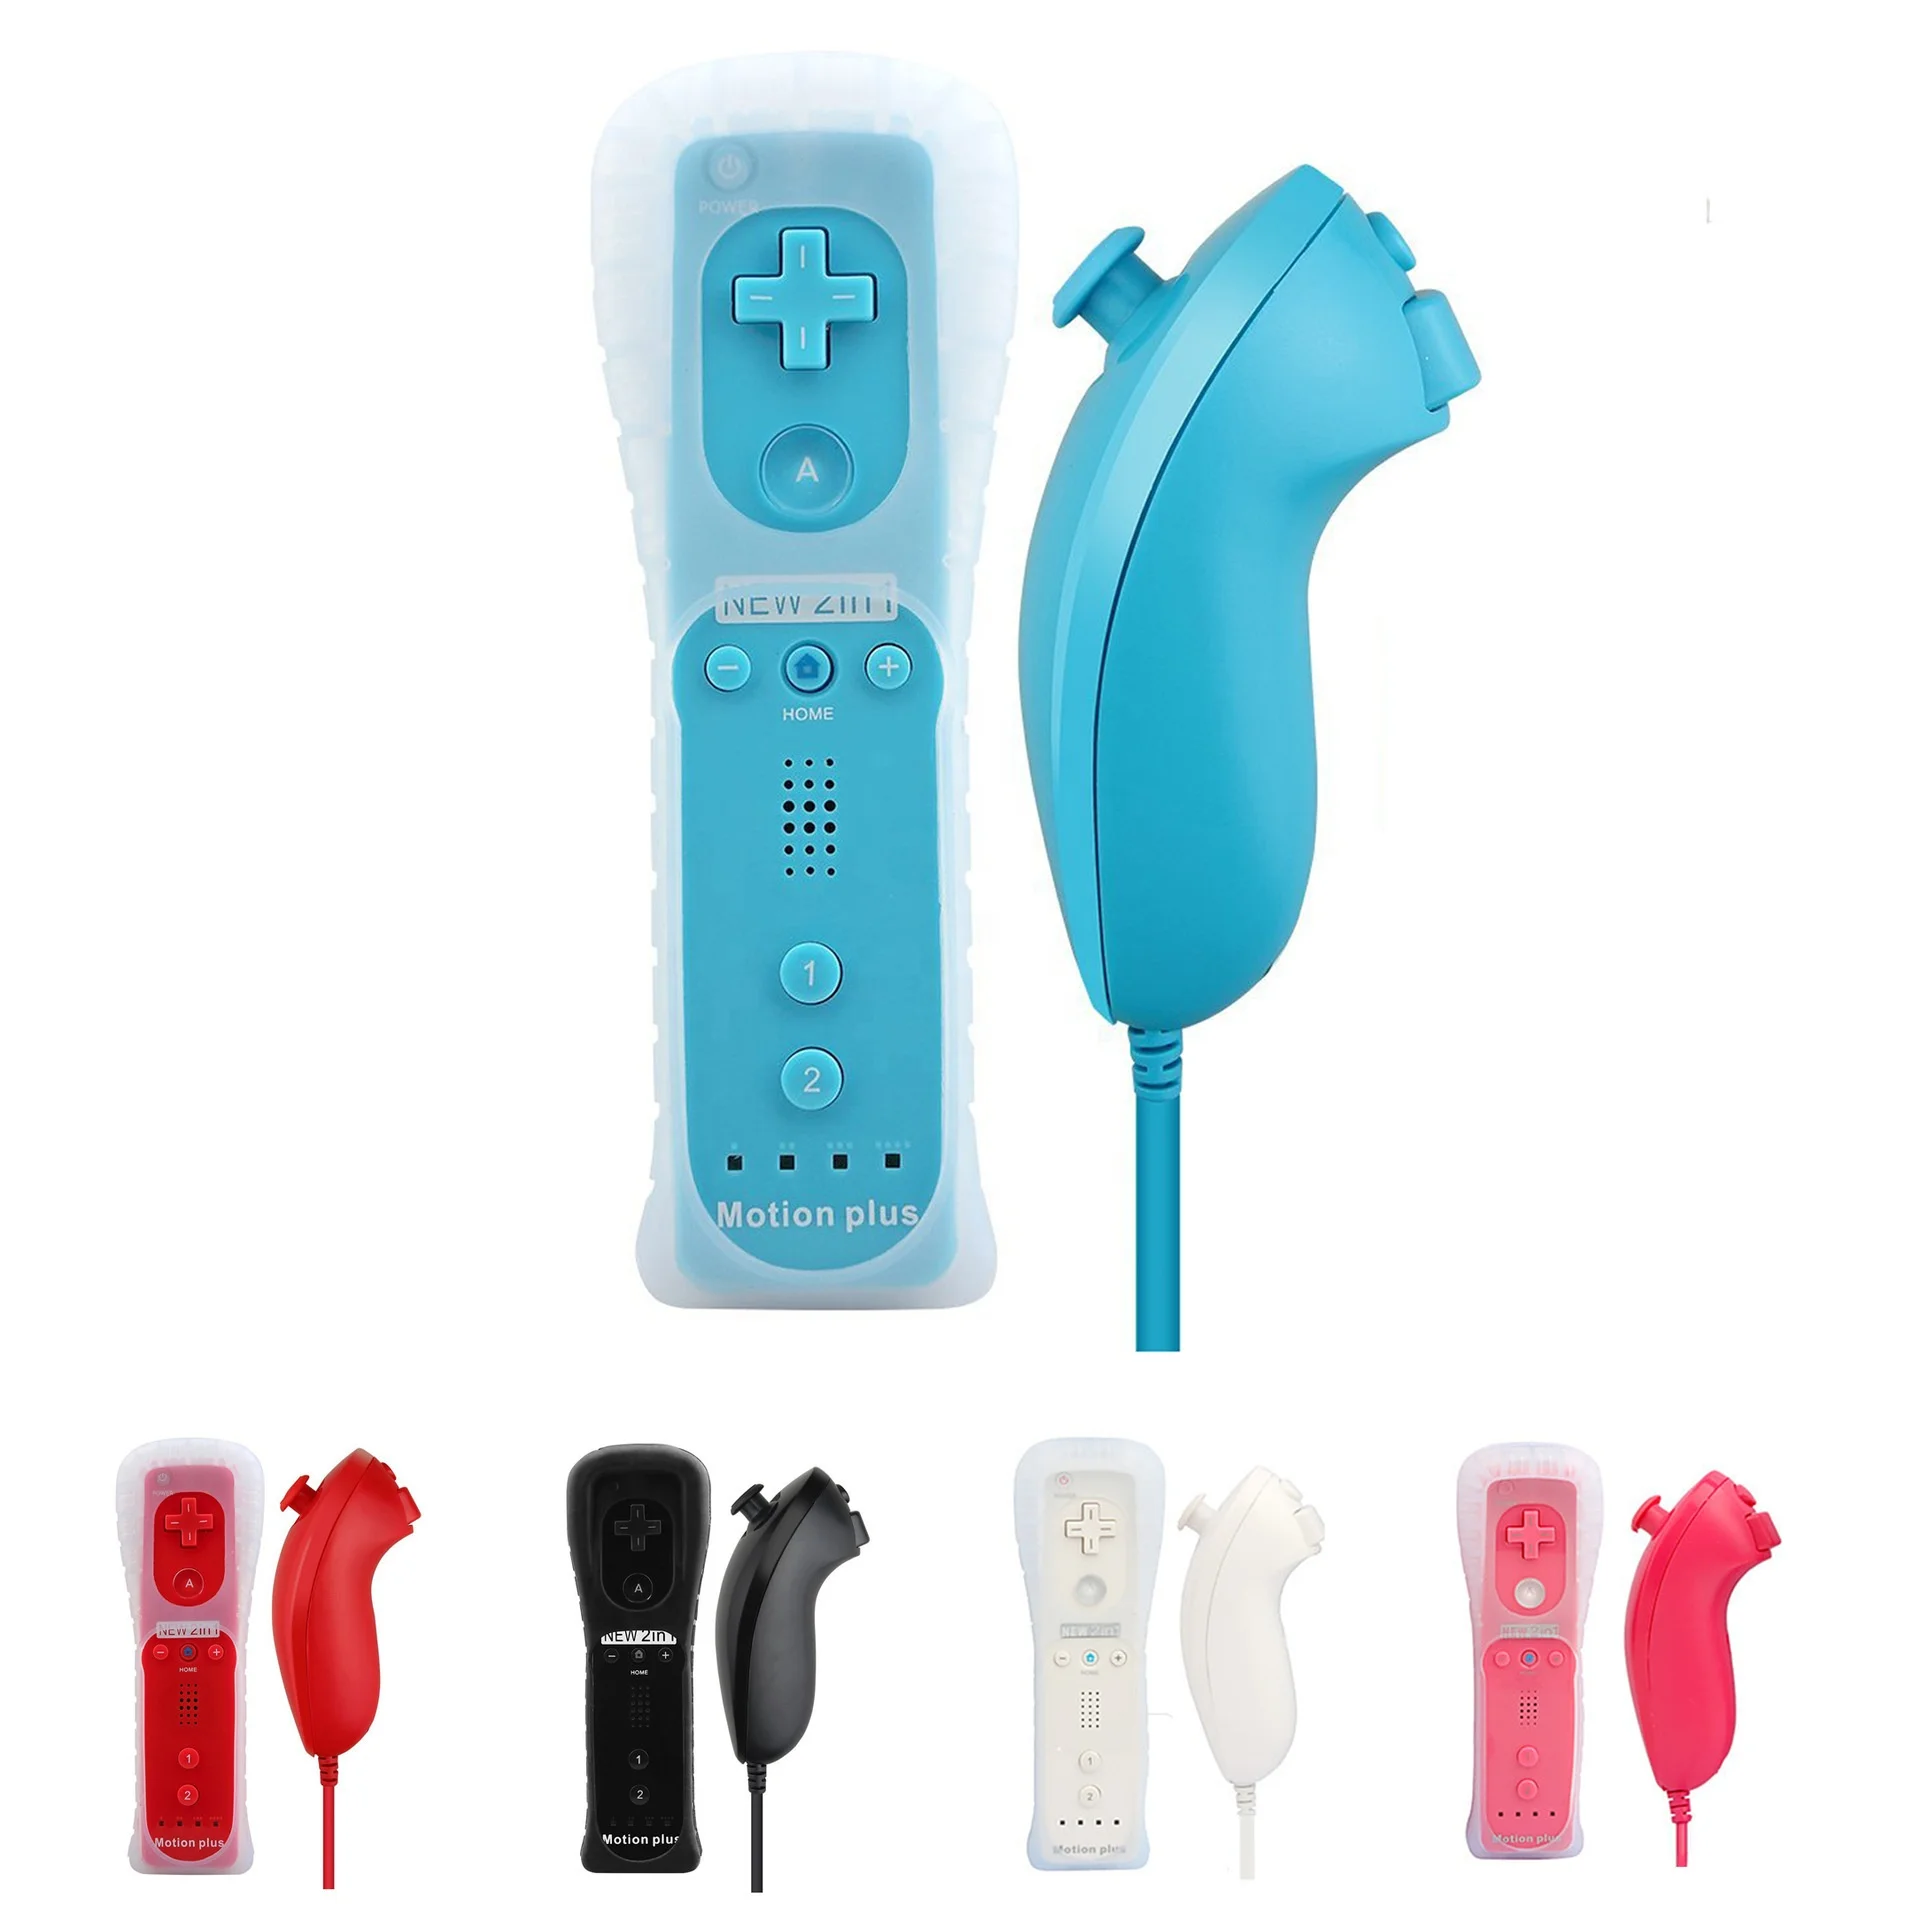 

2 in 1 Wireless Remote Nunchuk Controller Gamepad Motion Sensor Remote control Joysticks For Nintendo Wii Game Console, 6 colors